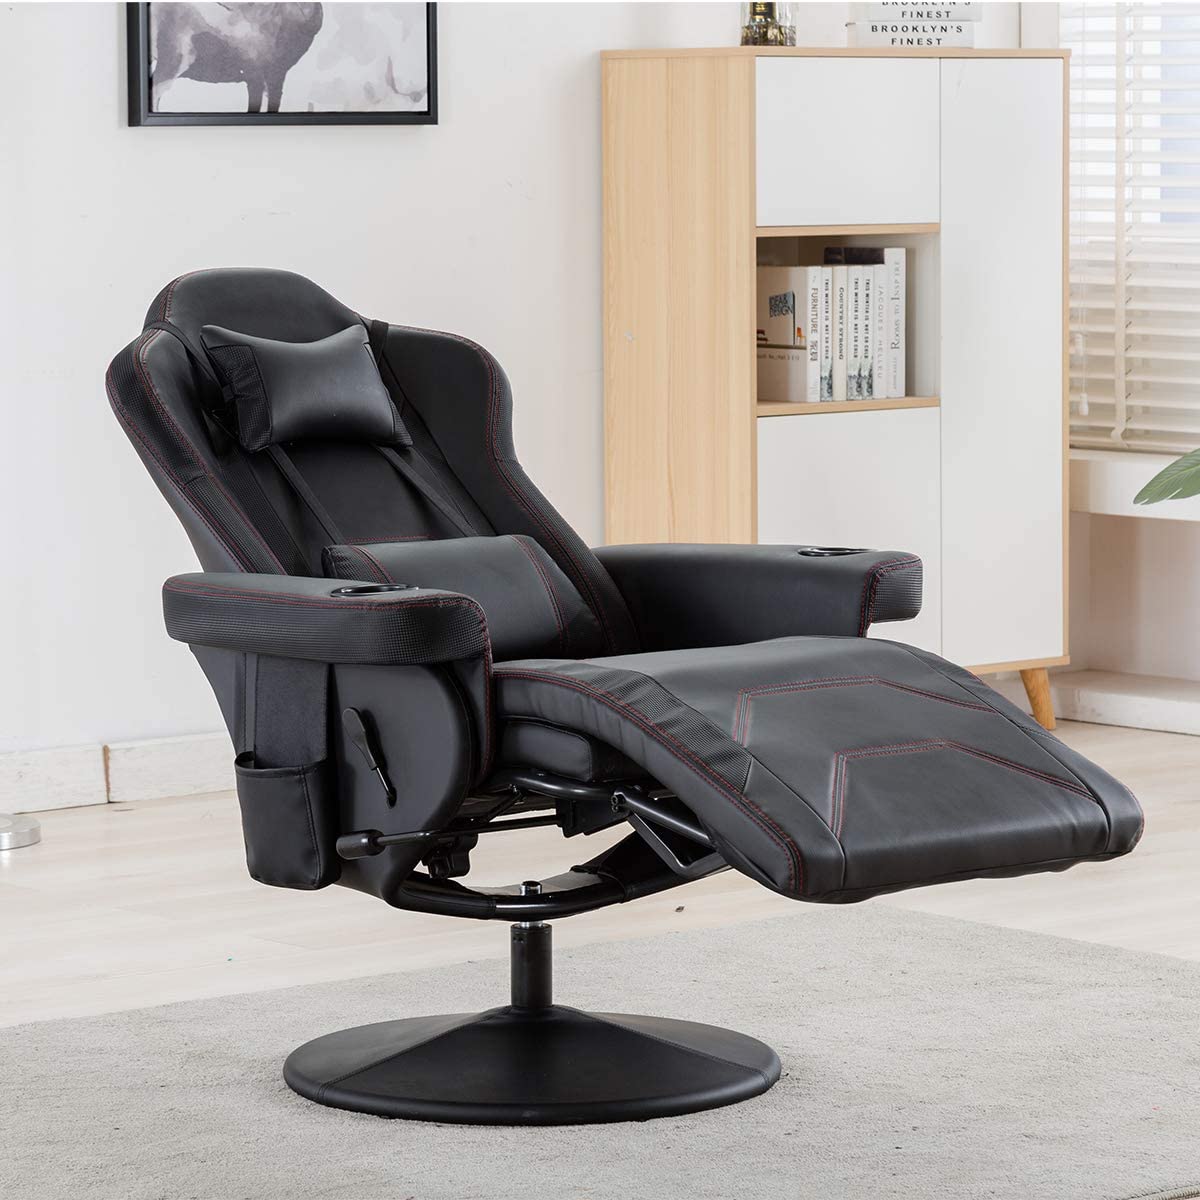 Executive Gaming Recliner and chair